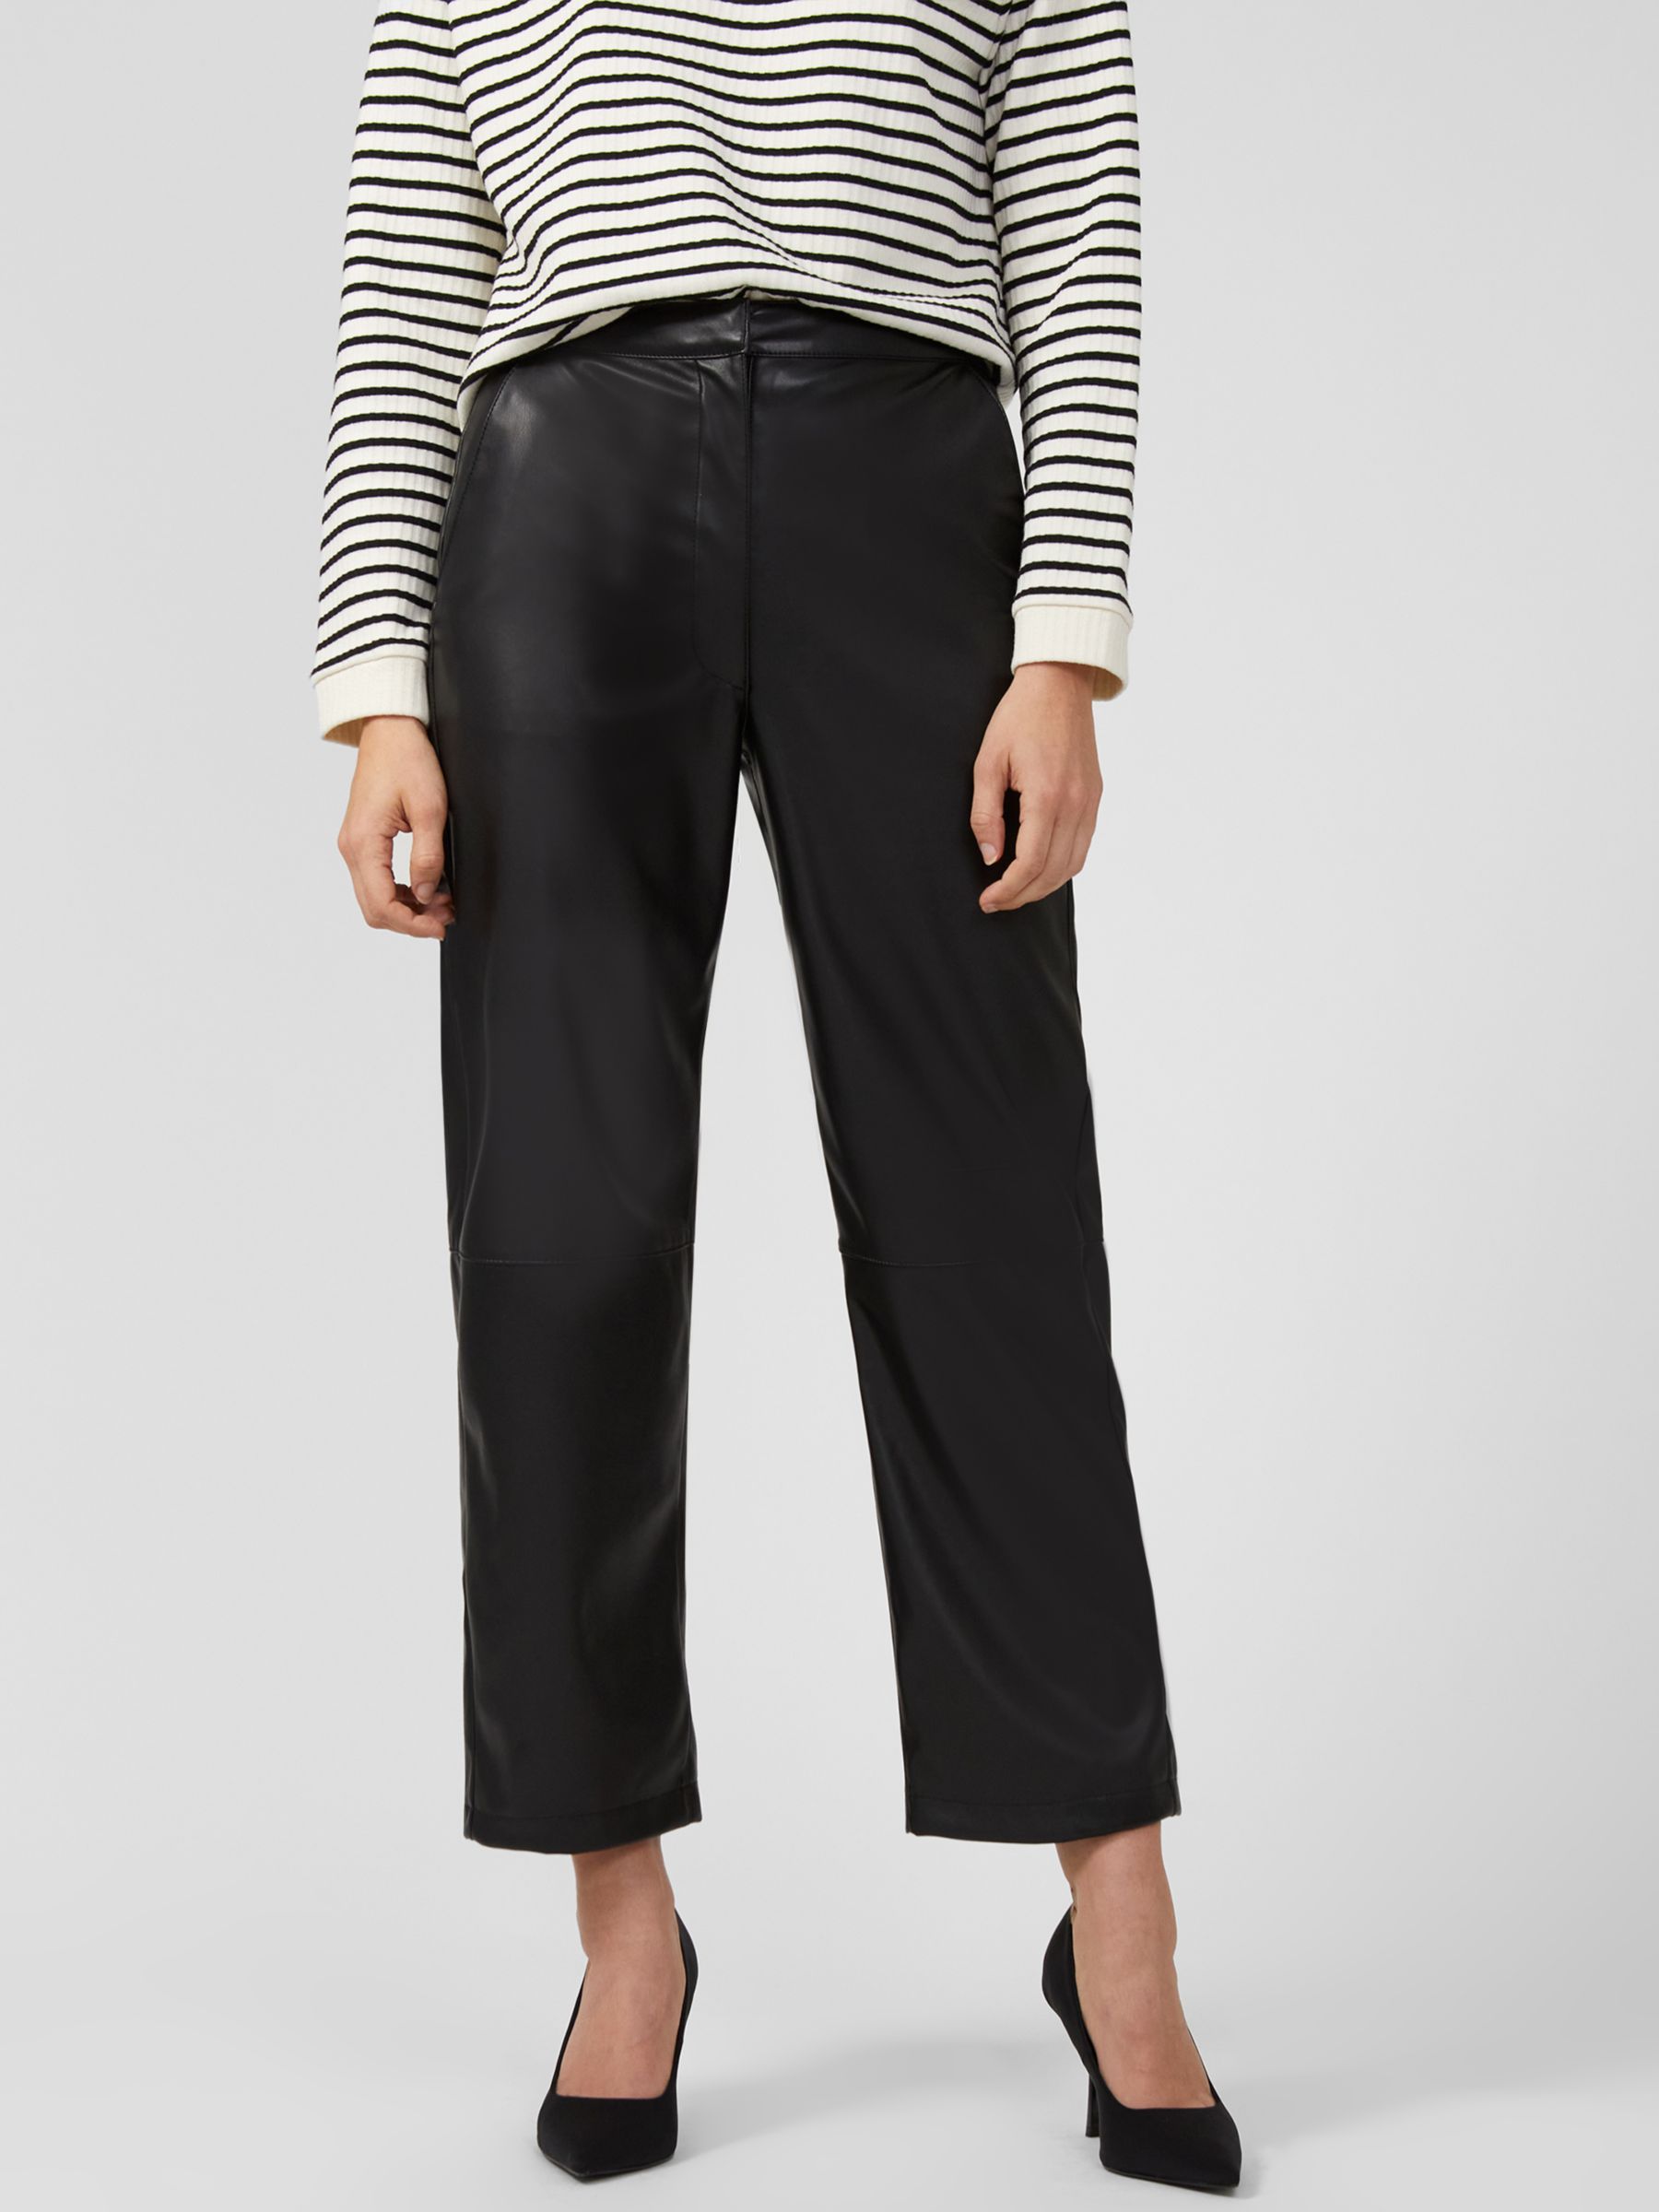 Buy Great Plains Ania Faux Leather Trouser, Black Online at johnlewis.com